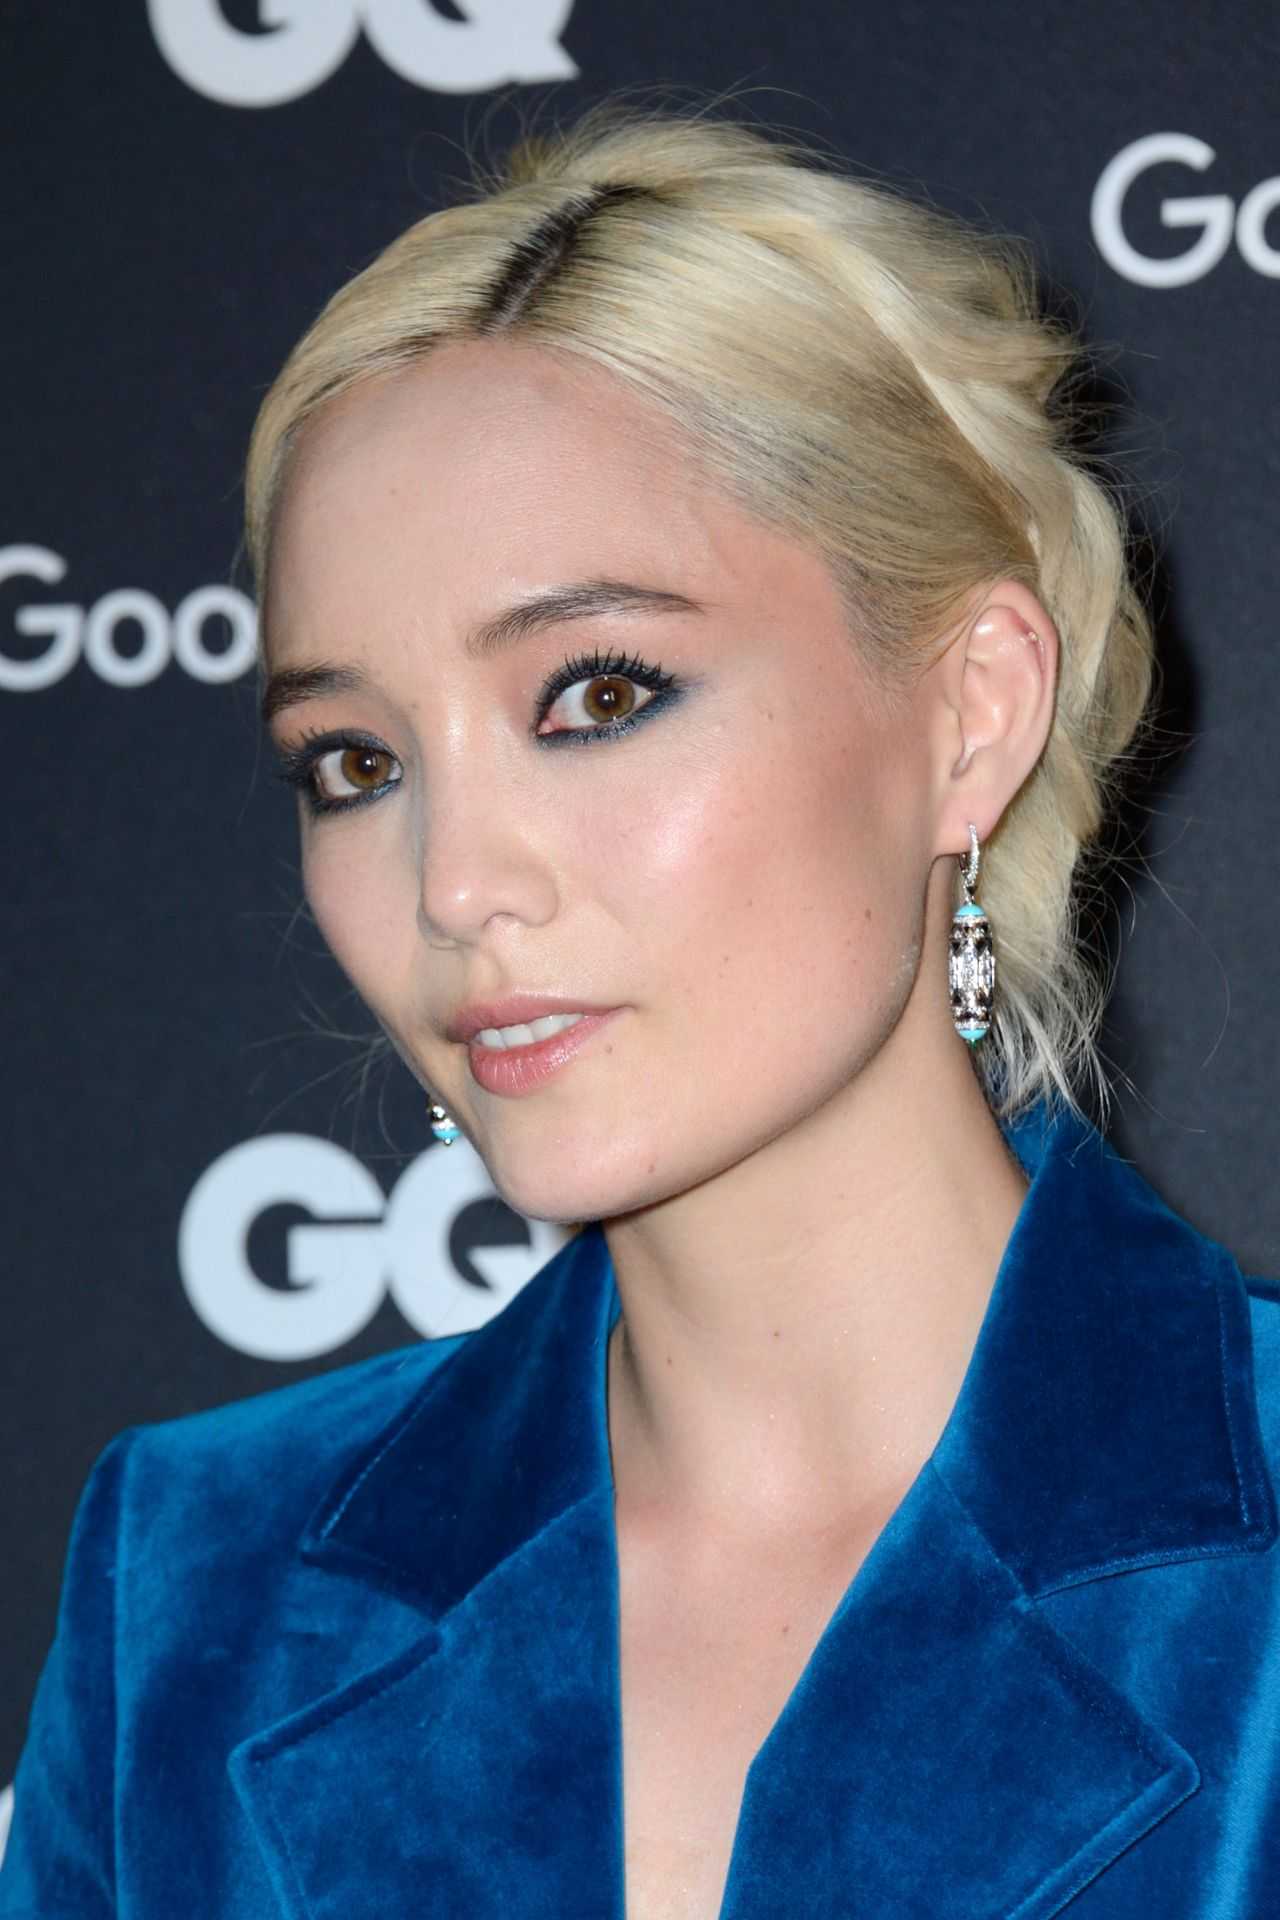 70+ Hot Pictures Of Pom Klementieff Who Plays Mantis In Marvel Cinematic Universe 112